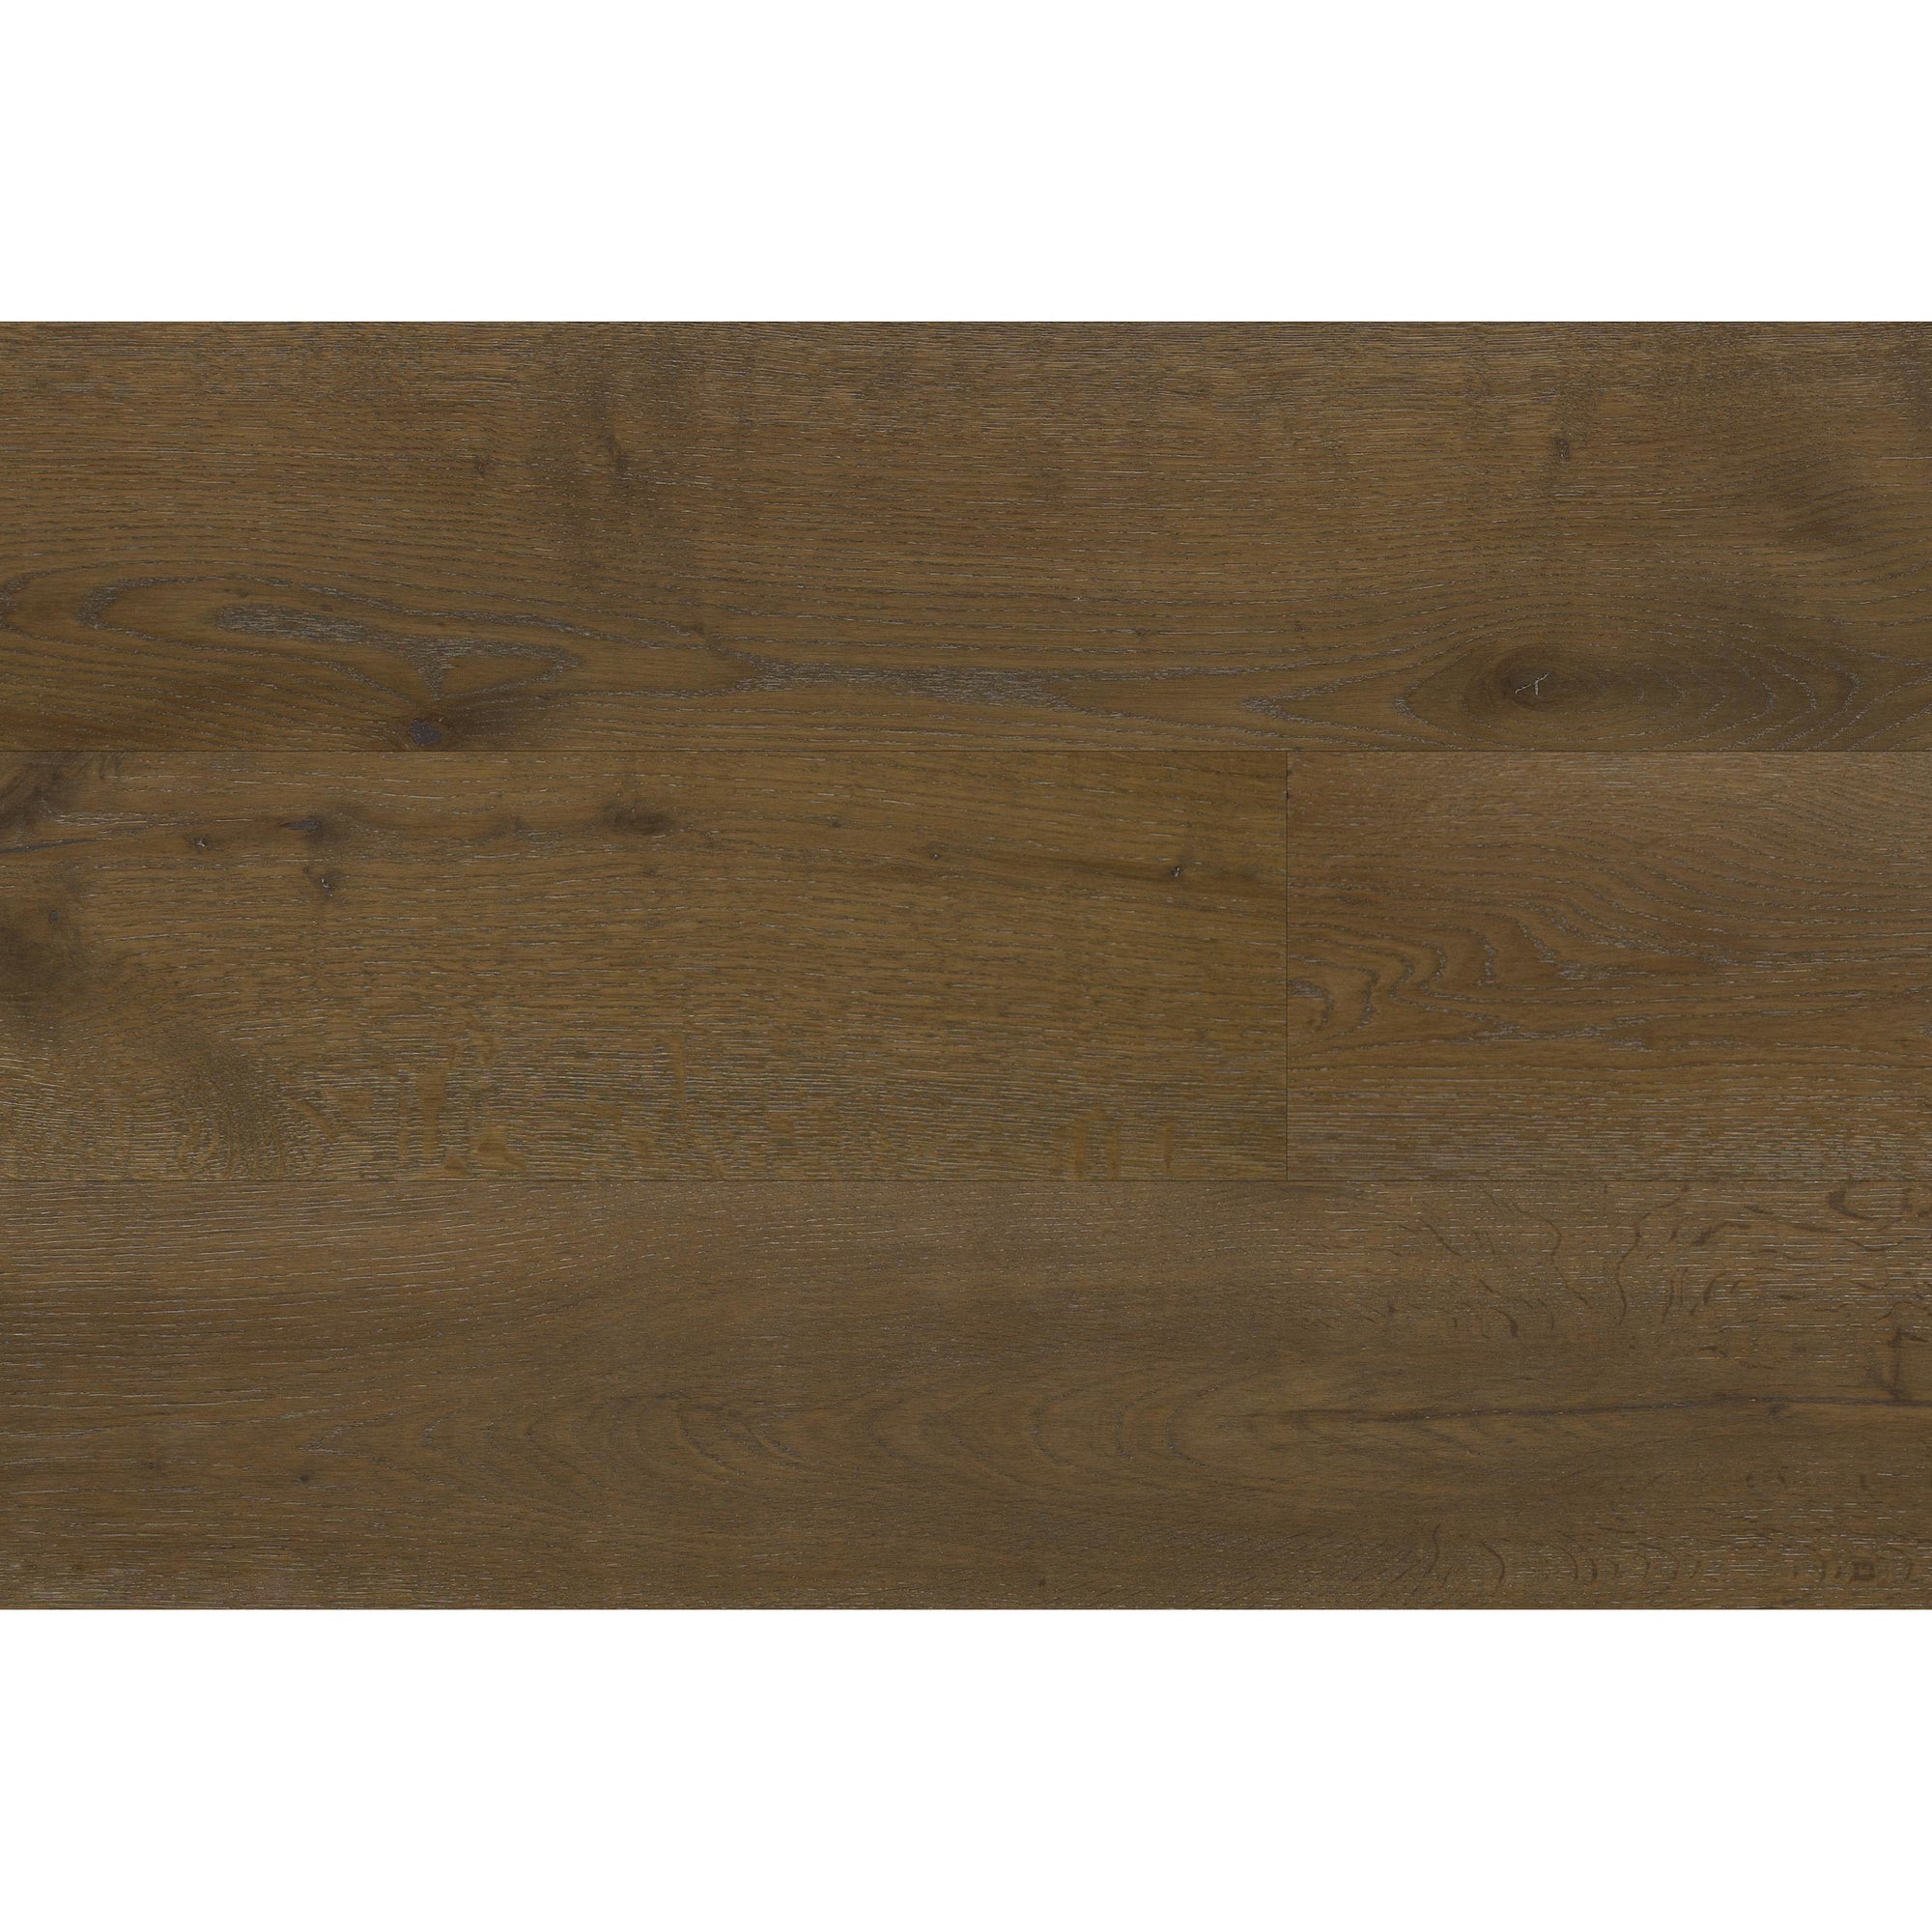 Naturally Aged Flooring - Pinnacle Collection - Spire